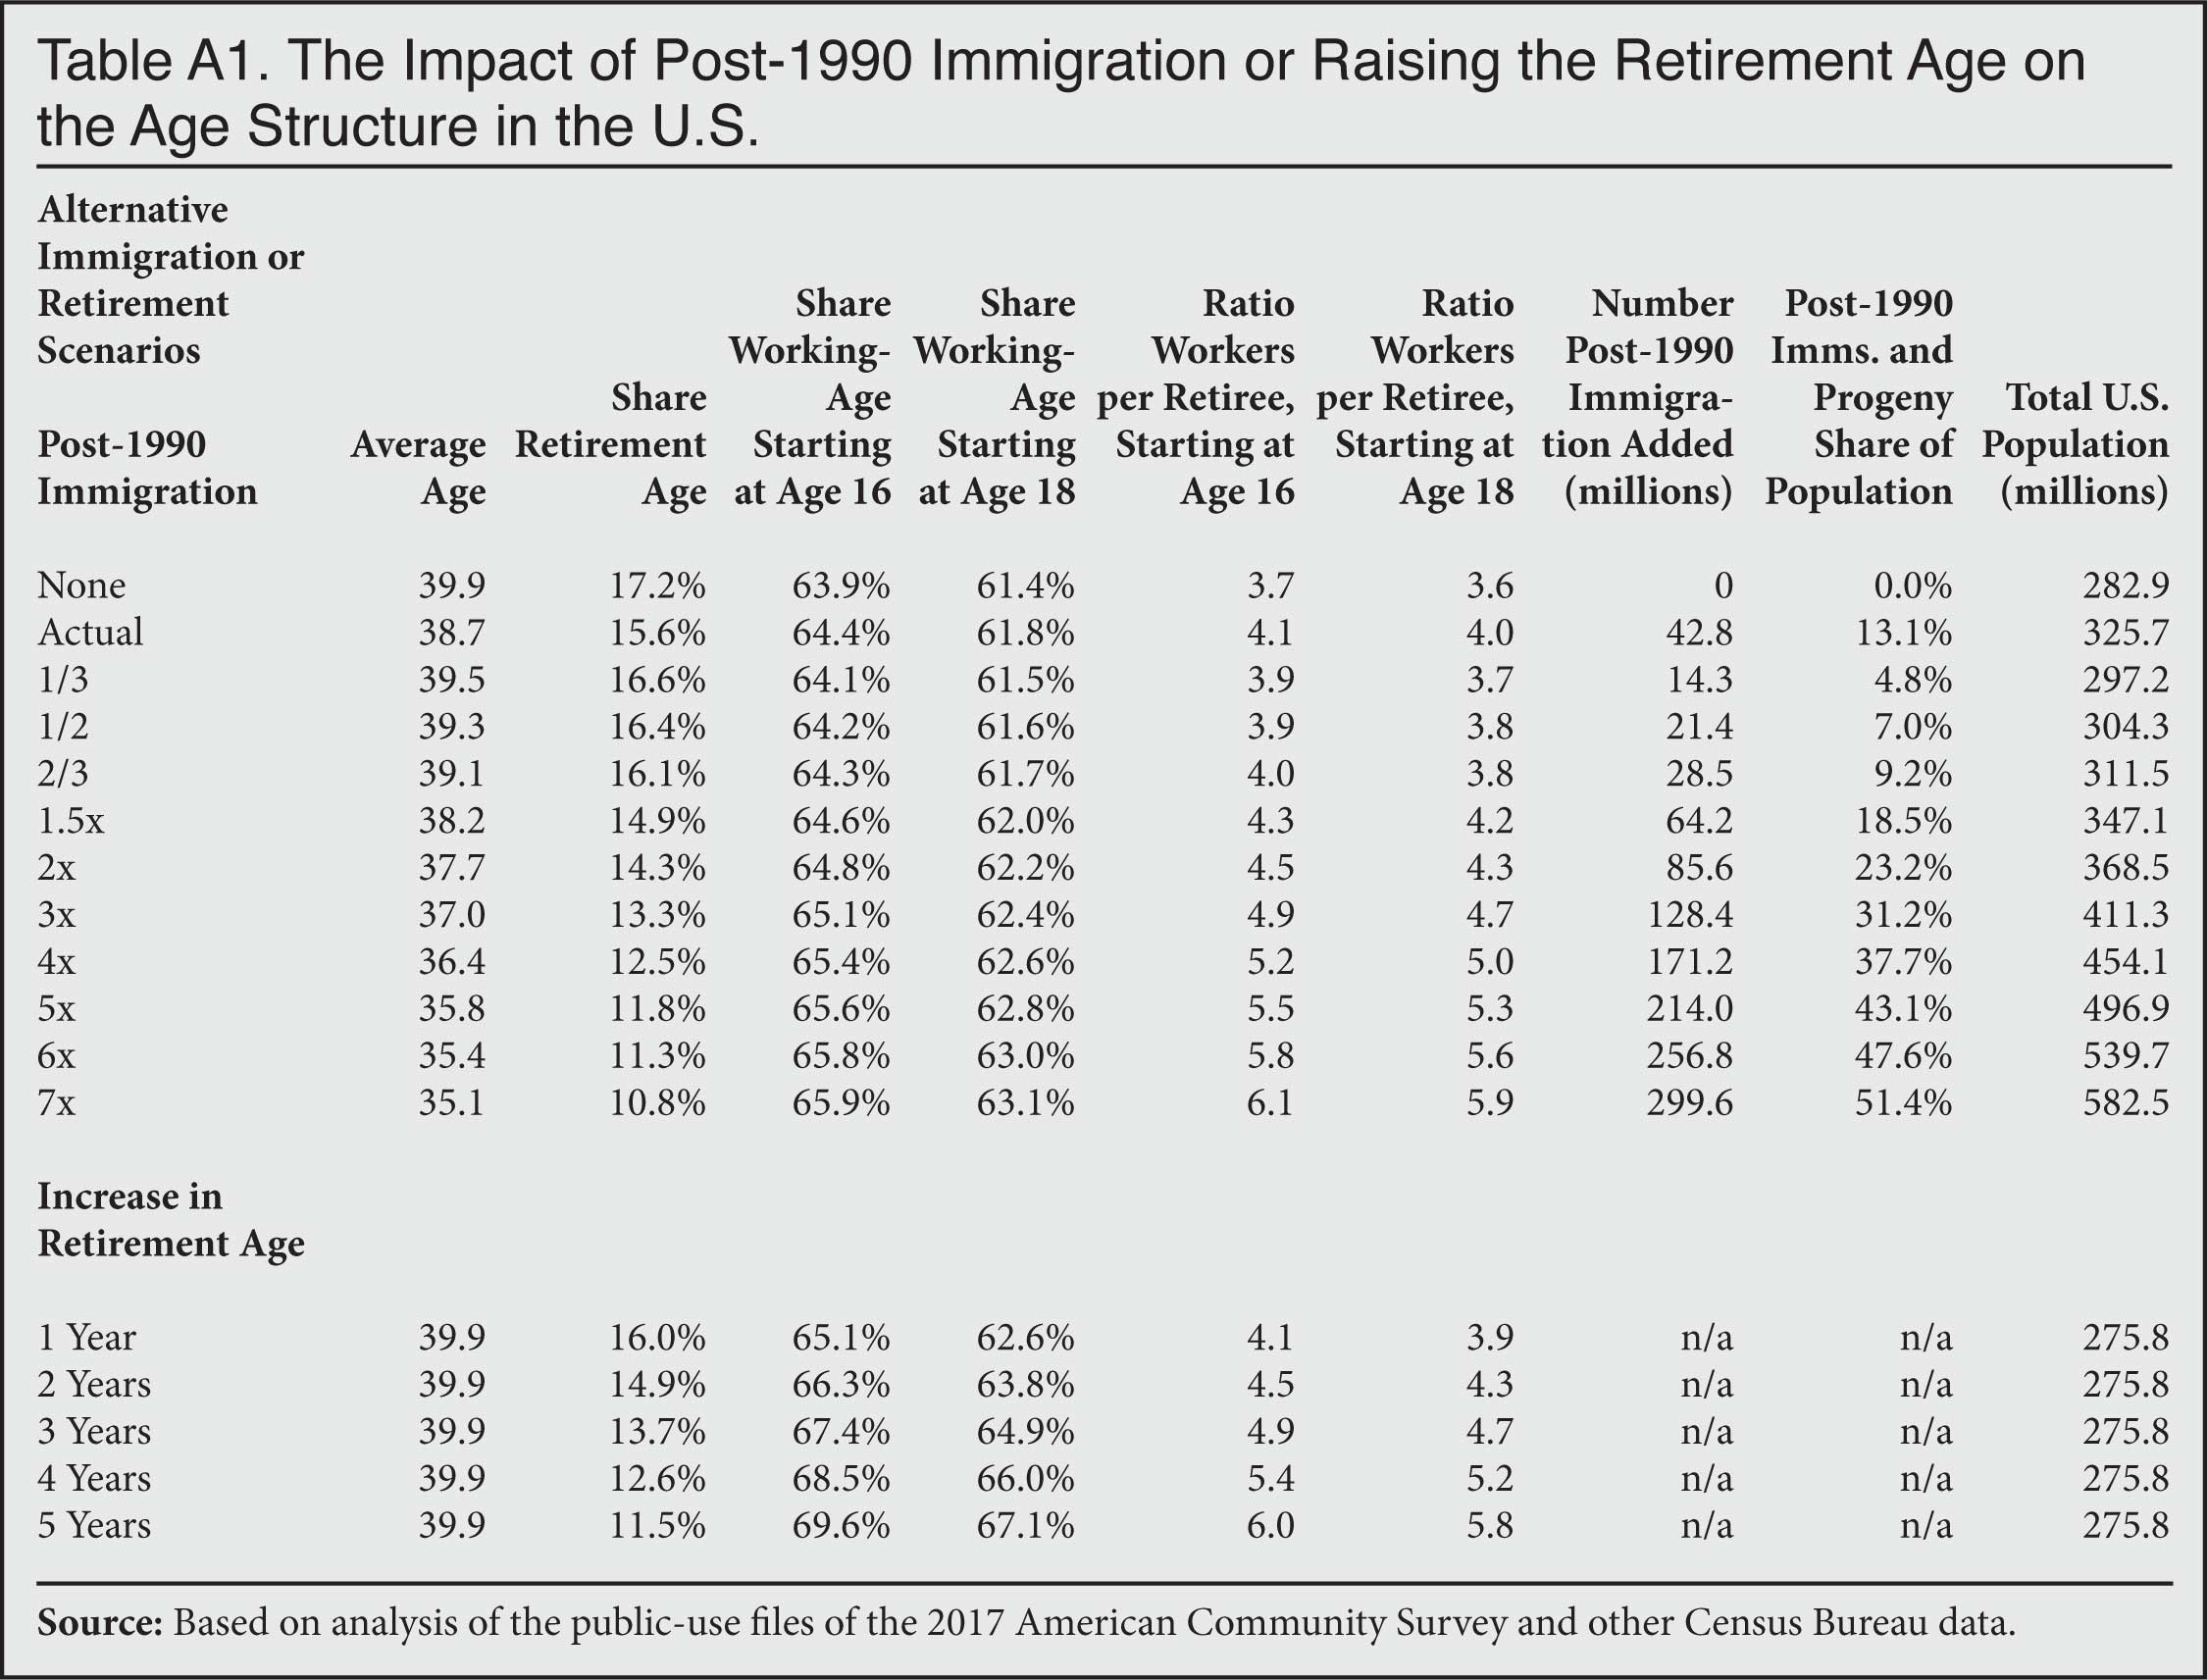 Table: The Impact of post-1990 immigration or raising the retirement age on the age structure in the U.S.